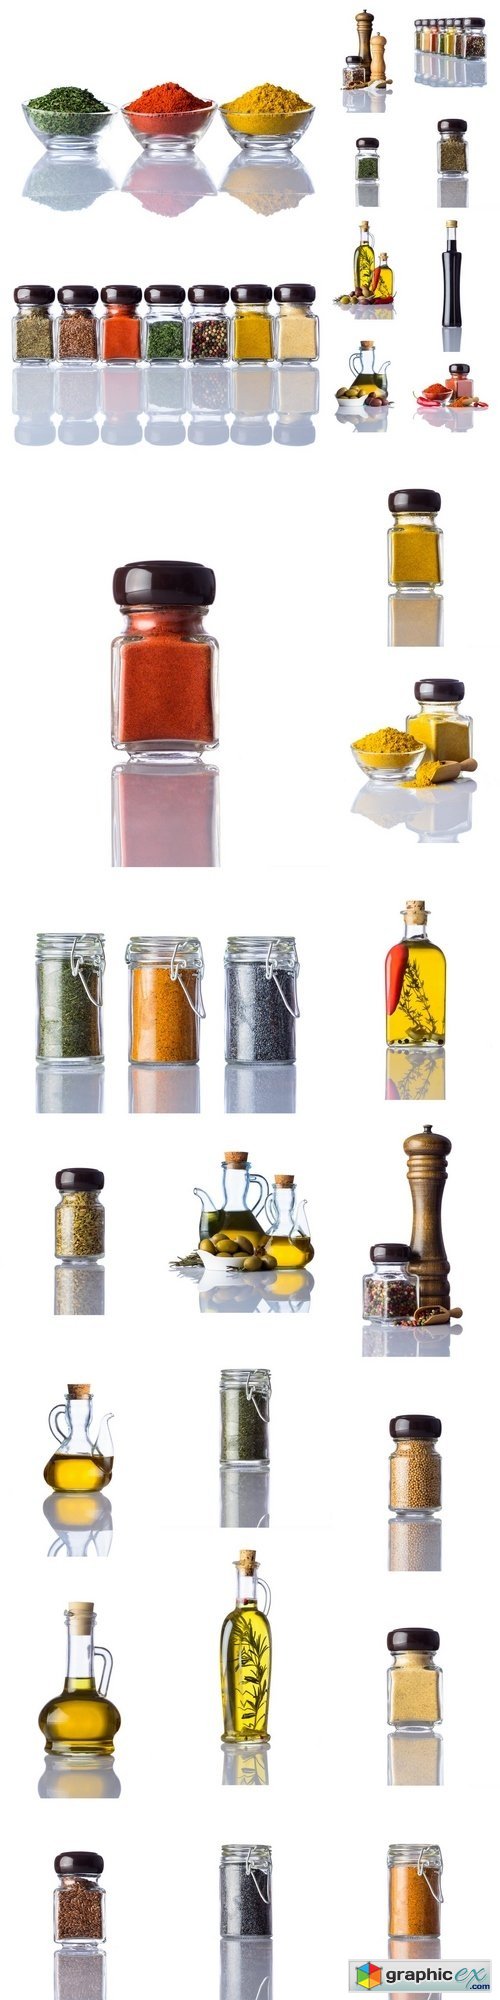 Spices in Jars on White Background